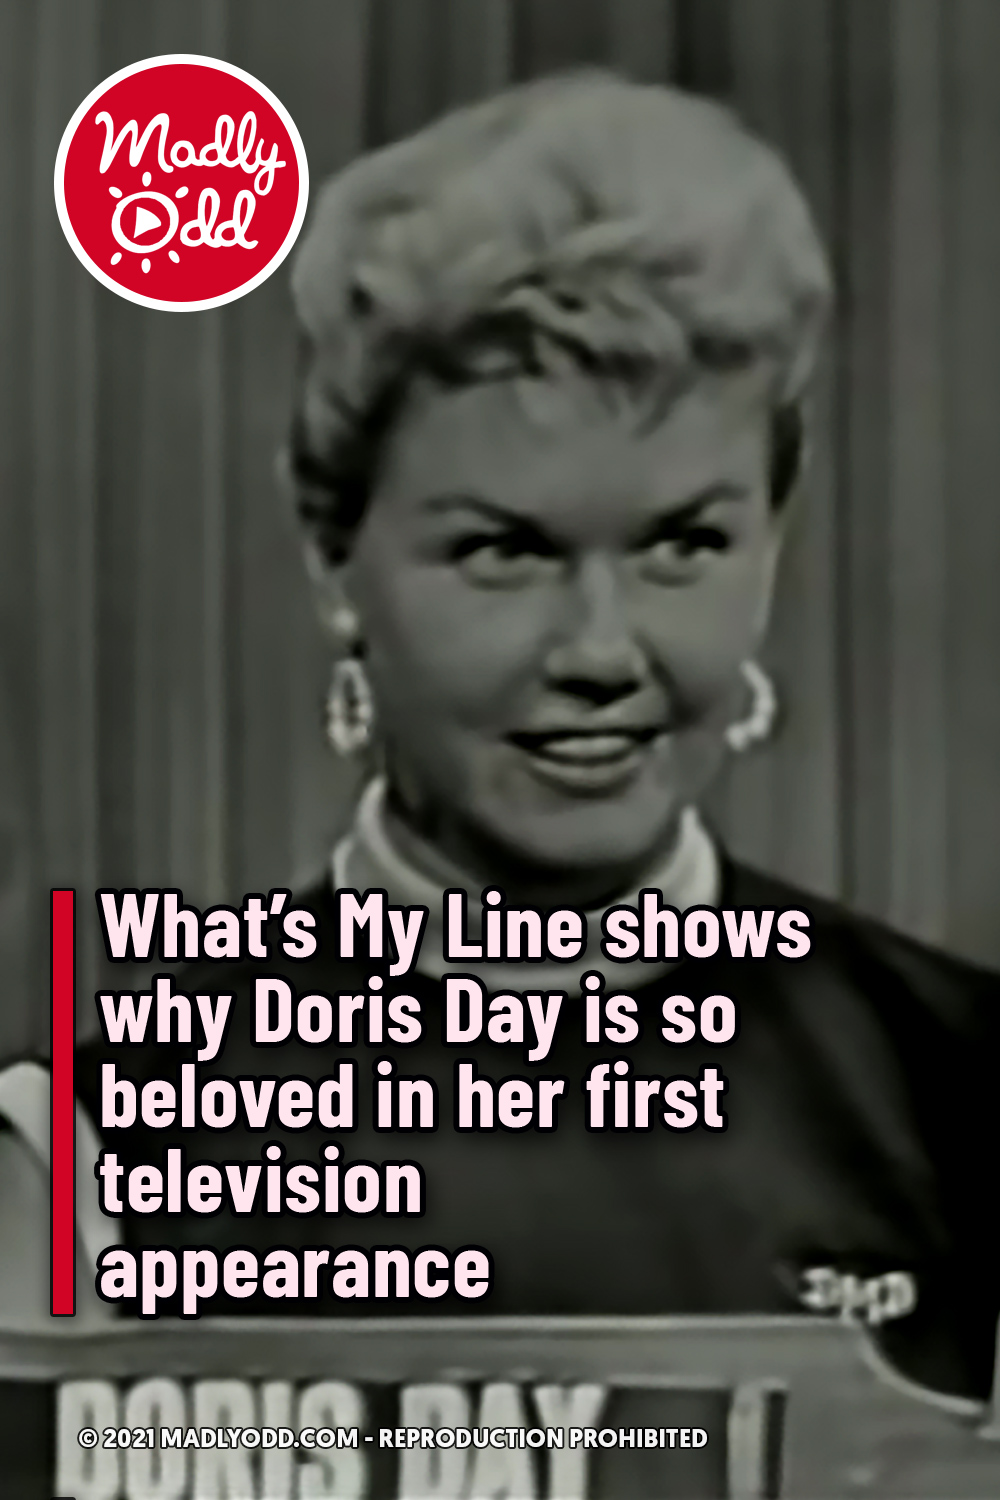 What’s My Line shows why Doris Day is so beloved in her first television appearance